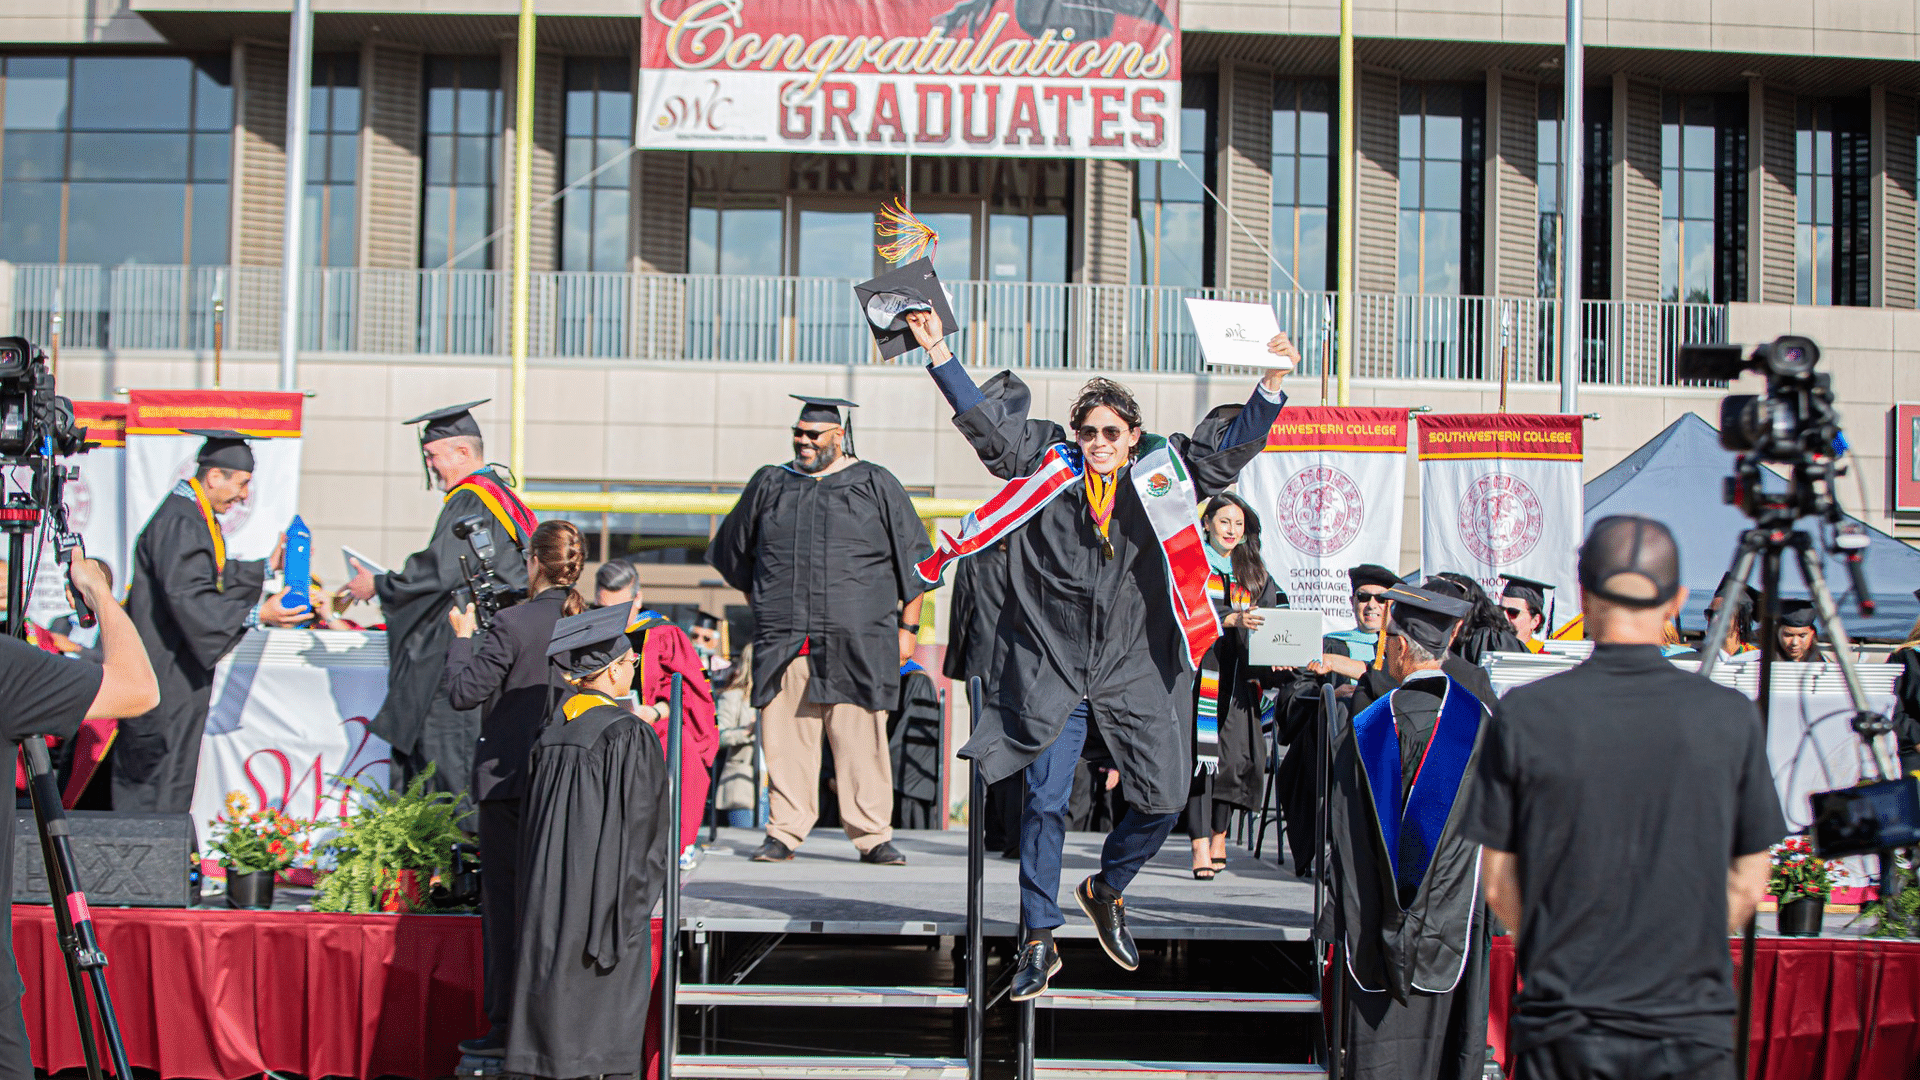 Graduate jumping for joy on stage at Southwestern College graduation